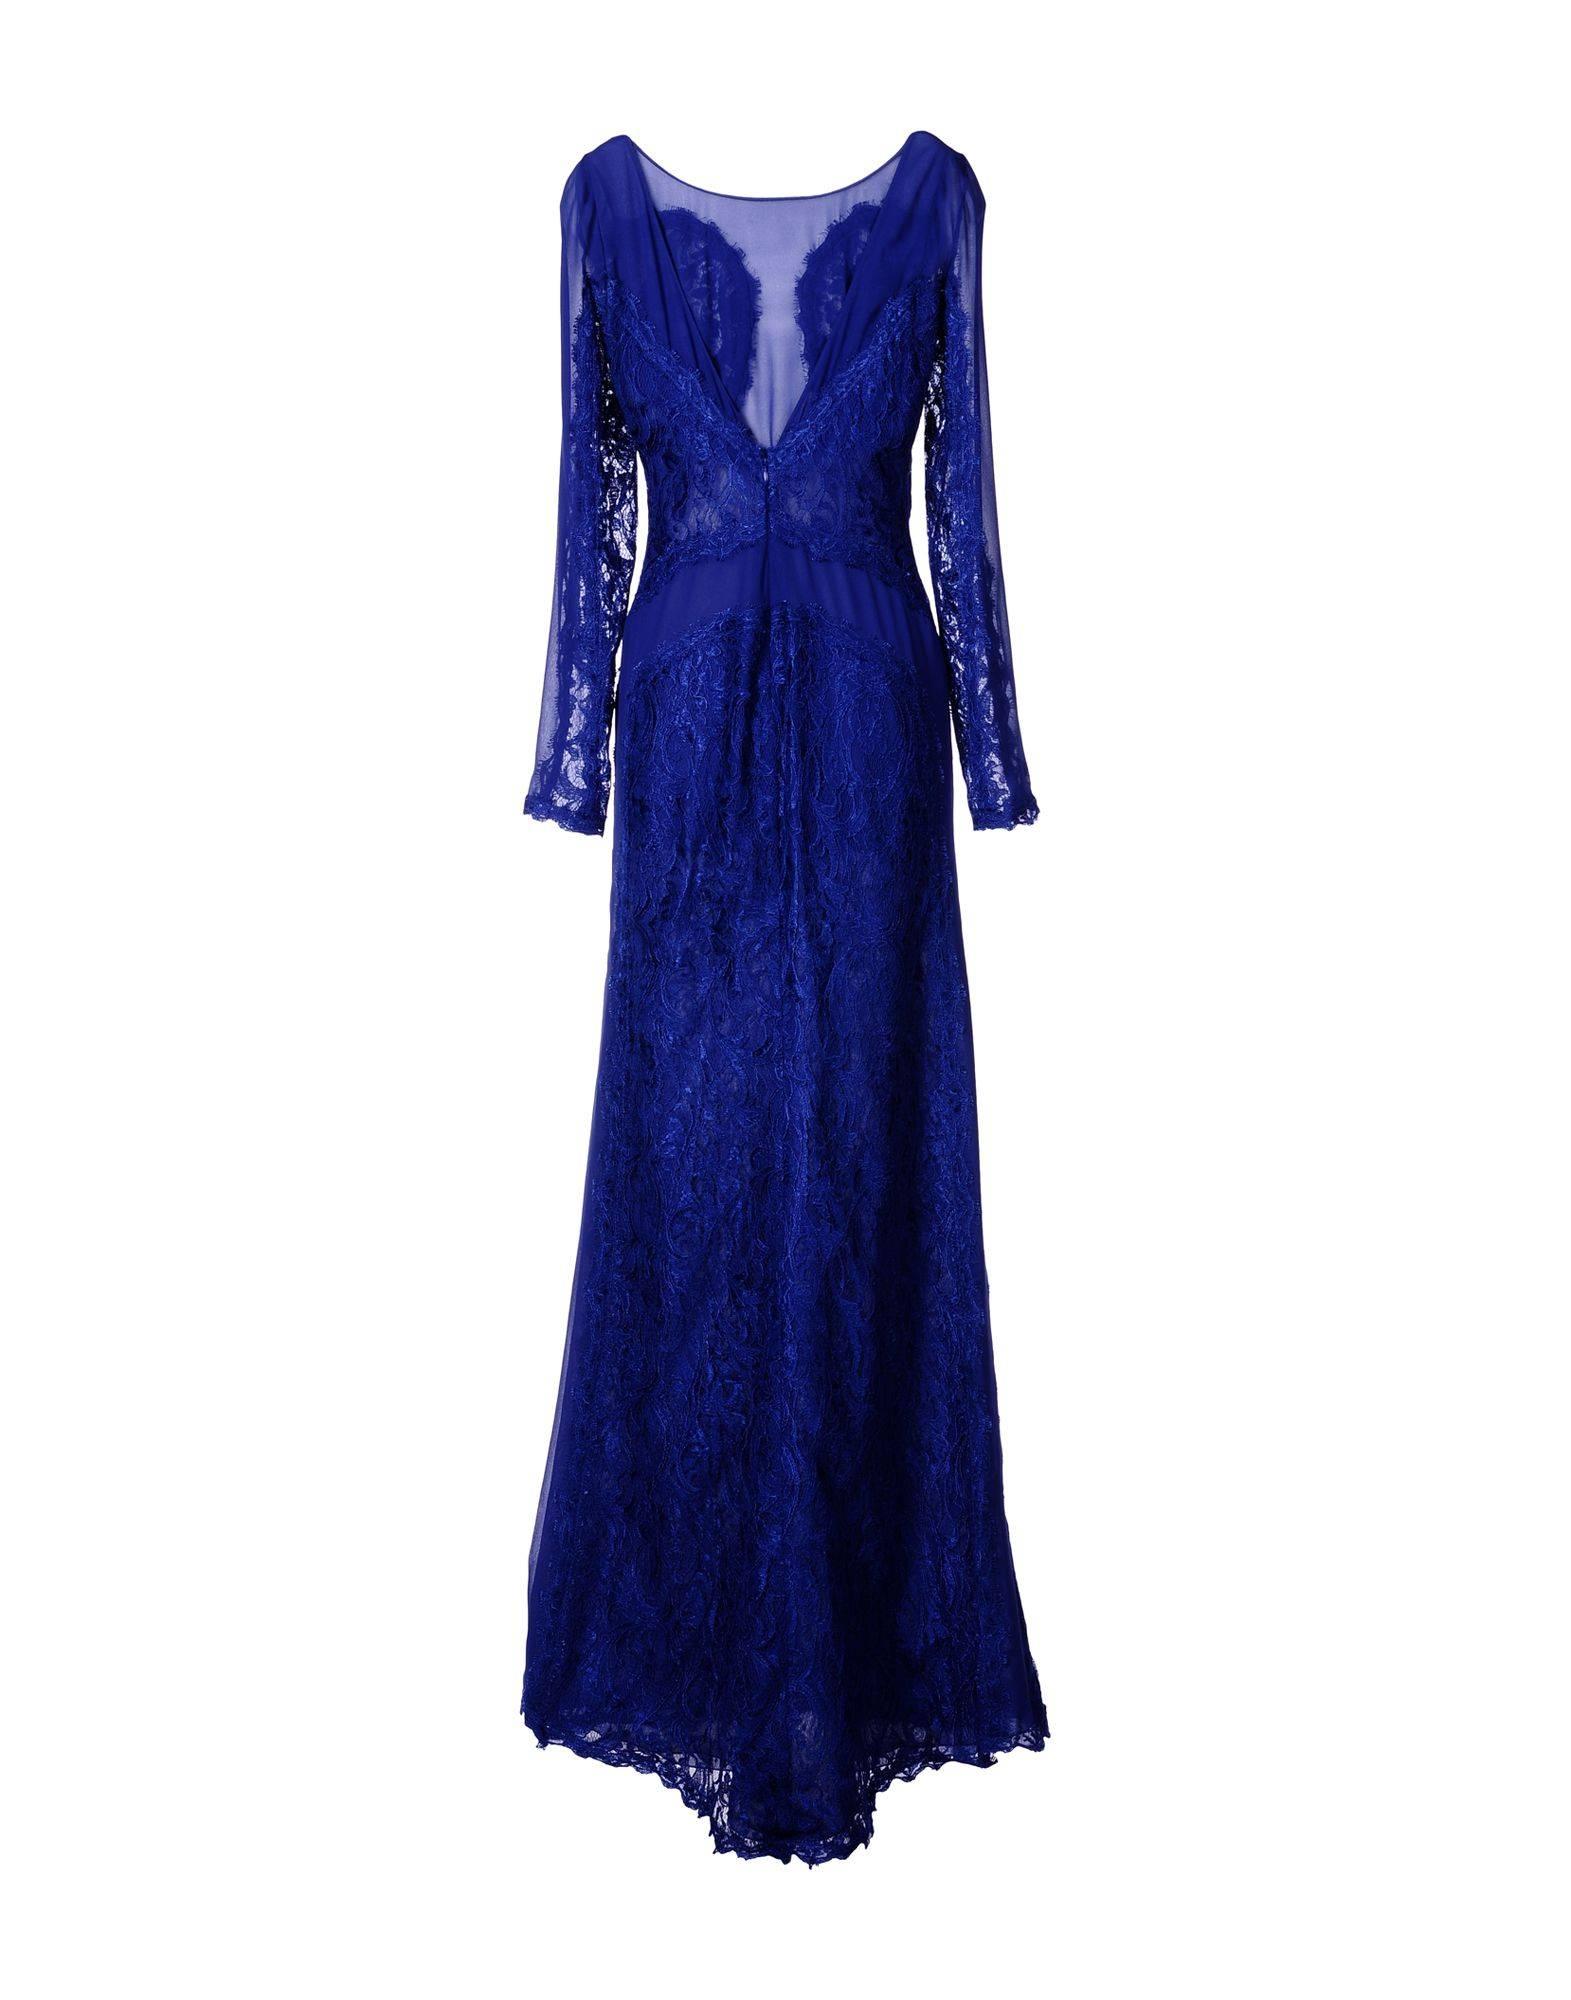 New Emilio Pucci Lace Cheer Gown
Italian size 40
Color - Blue.
Fully Lined - 100% Silk.
Back Side Zipper Closure.
Measurements Flat: Length on front - 60 inches, Length on back - 65